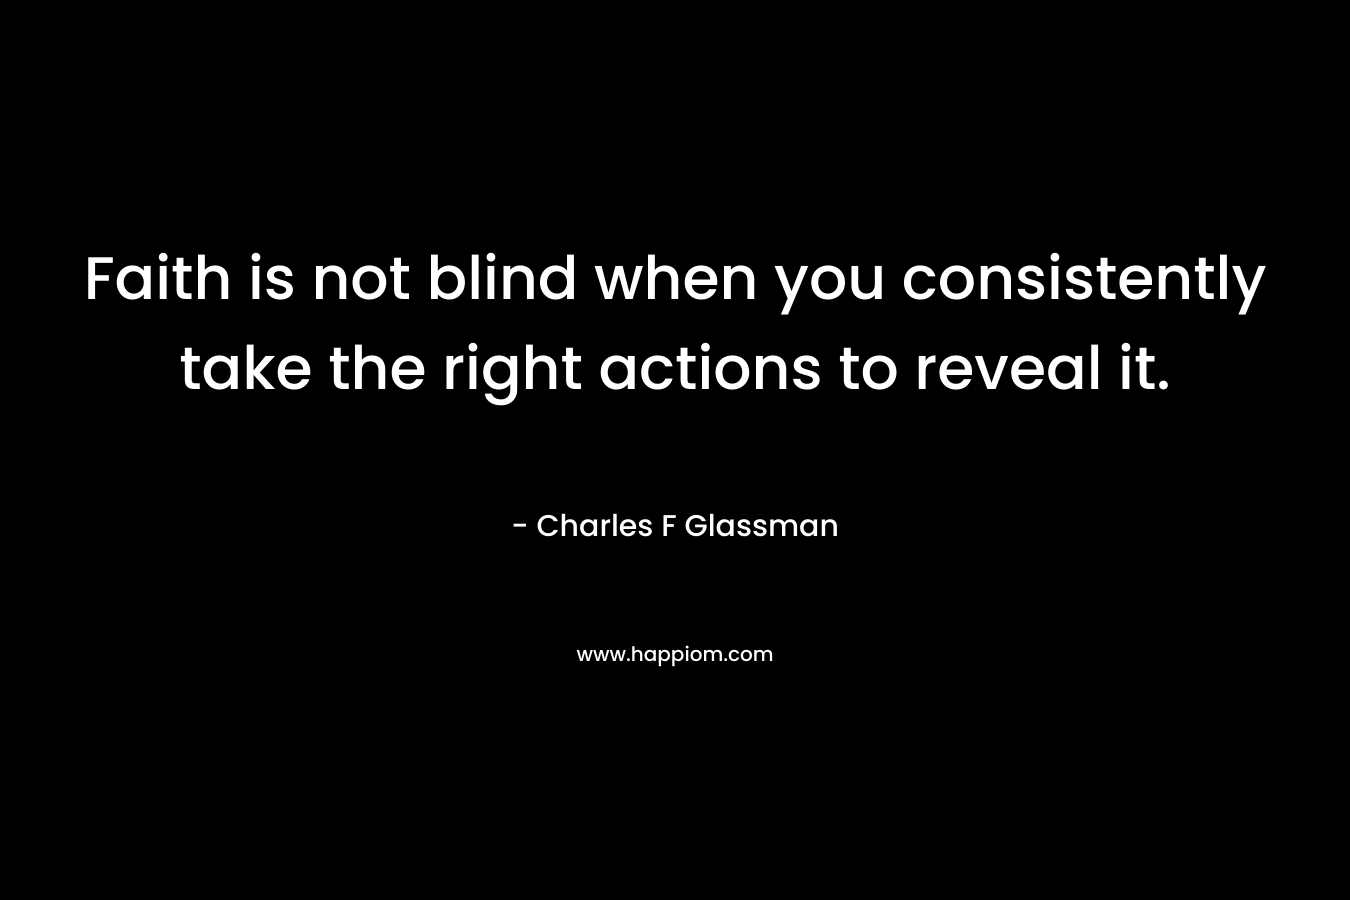 Faith is not blind when you consistently take the right actions to reveal it.